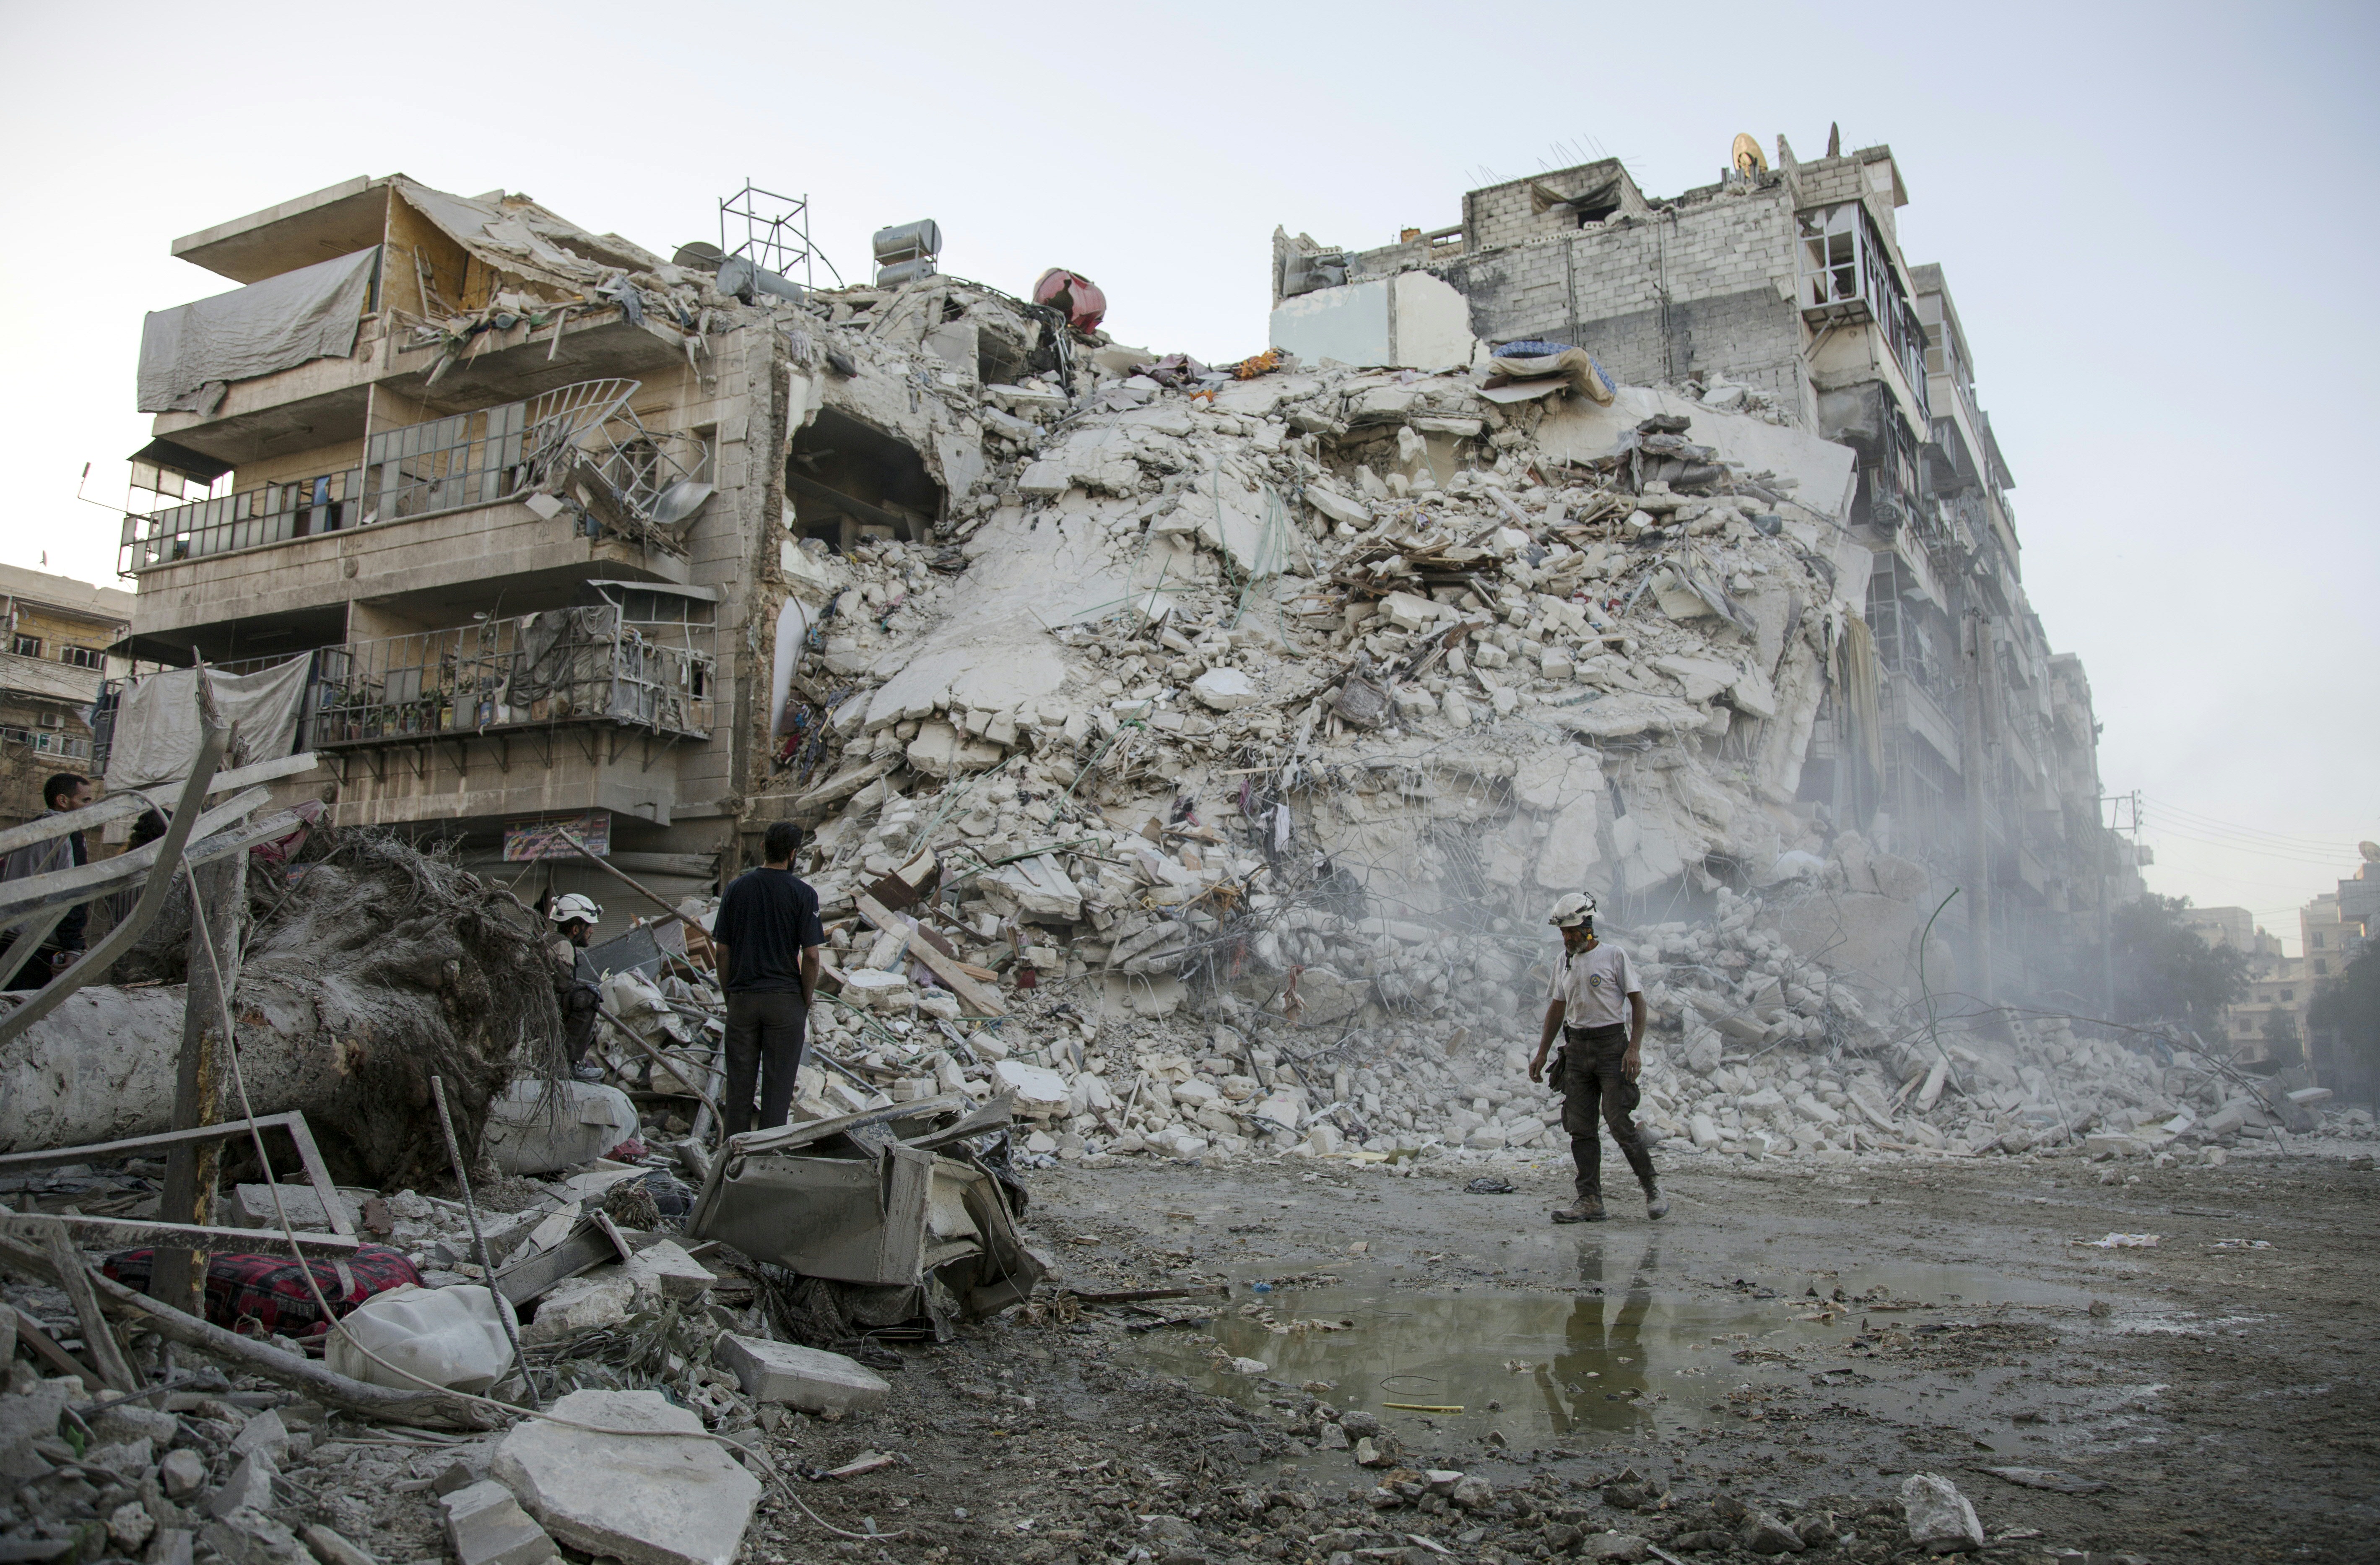 Members of the Syrian Civil Defence, known as the White Helmets, search for victims amid the rubble of a destroyed building following reported air strikes in the rebel-held Qatarji neighbourhood of the northern city of Aleppo, on October 17, 2016.  Dozens of civilians were killed as air strikes hammered rebel-held parts of Aleppo early morning, despite Western warnings of potential sanctions against Syria and Russia over attacks on the city. Both Russian and Syrian warplanes are carrying out air strikes over Aleppo in support of a major offensive by regime forces to capture rebel-held parts of the northern city.  / AFP PHOTO / KARAM AL-MASRI